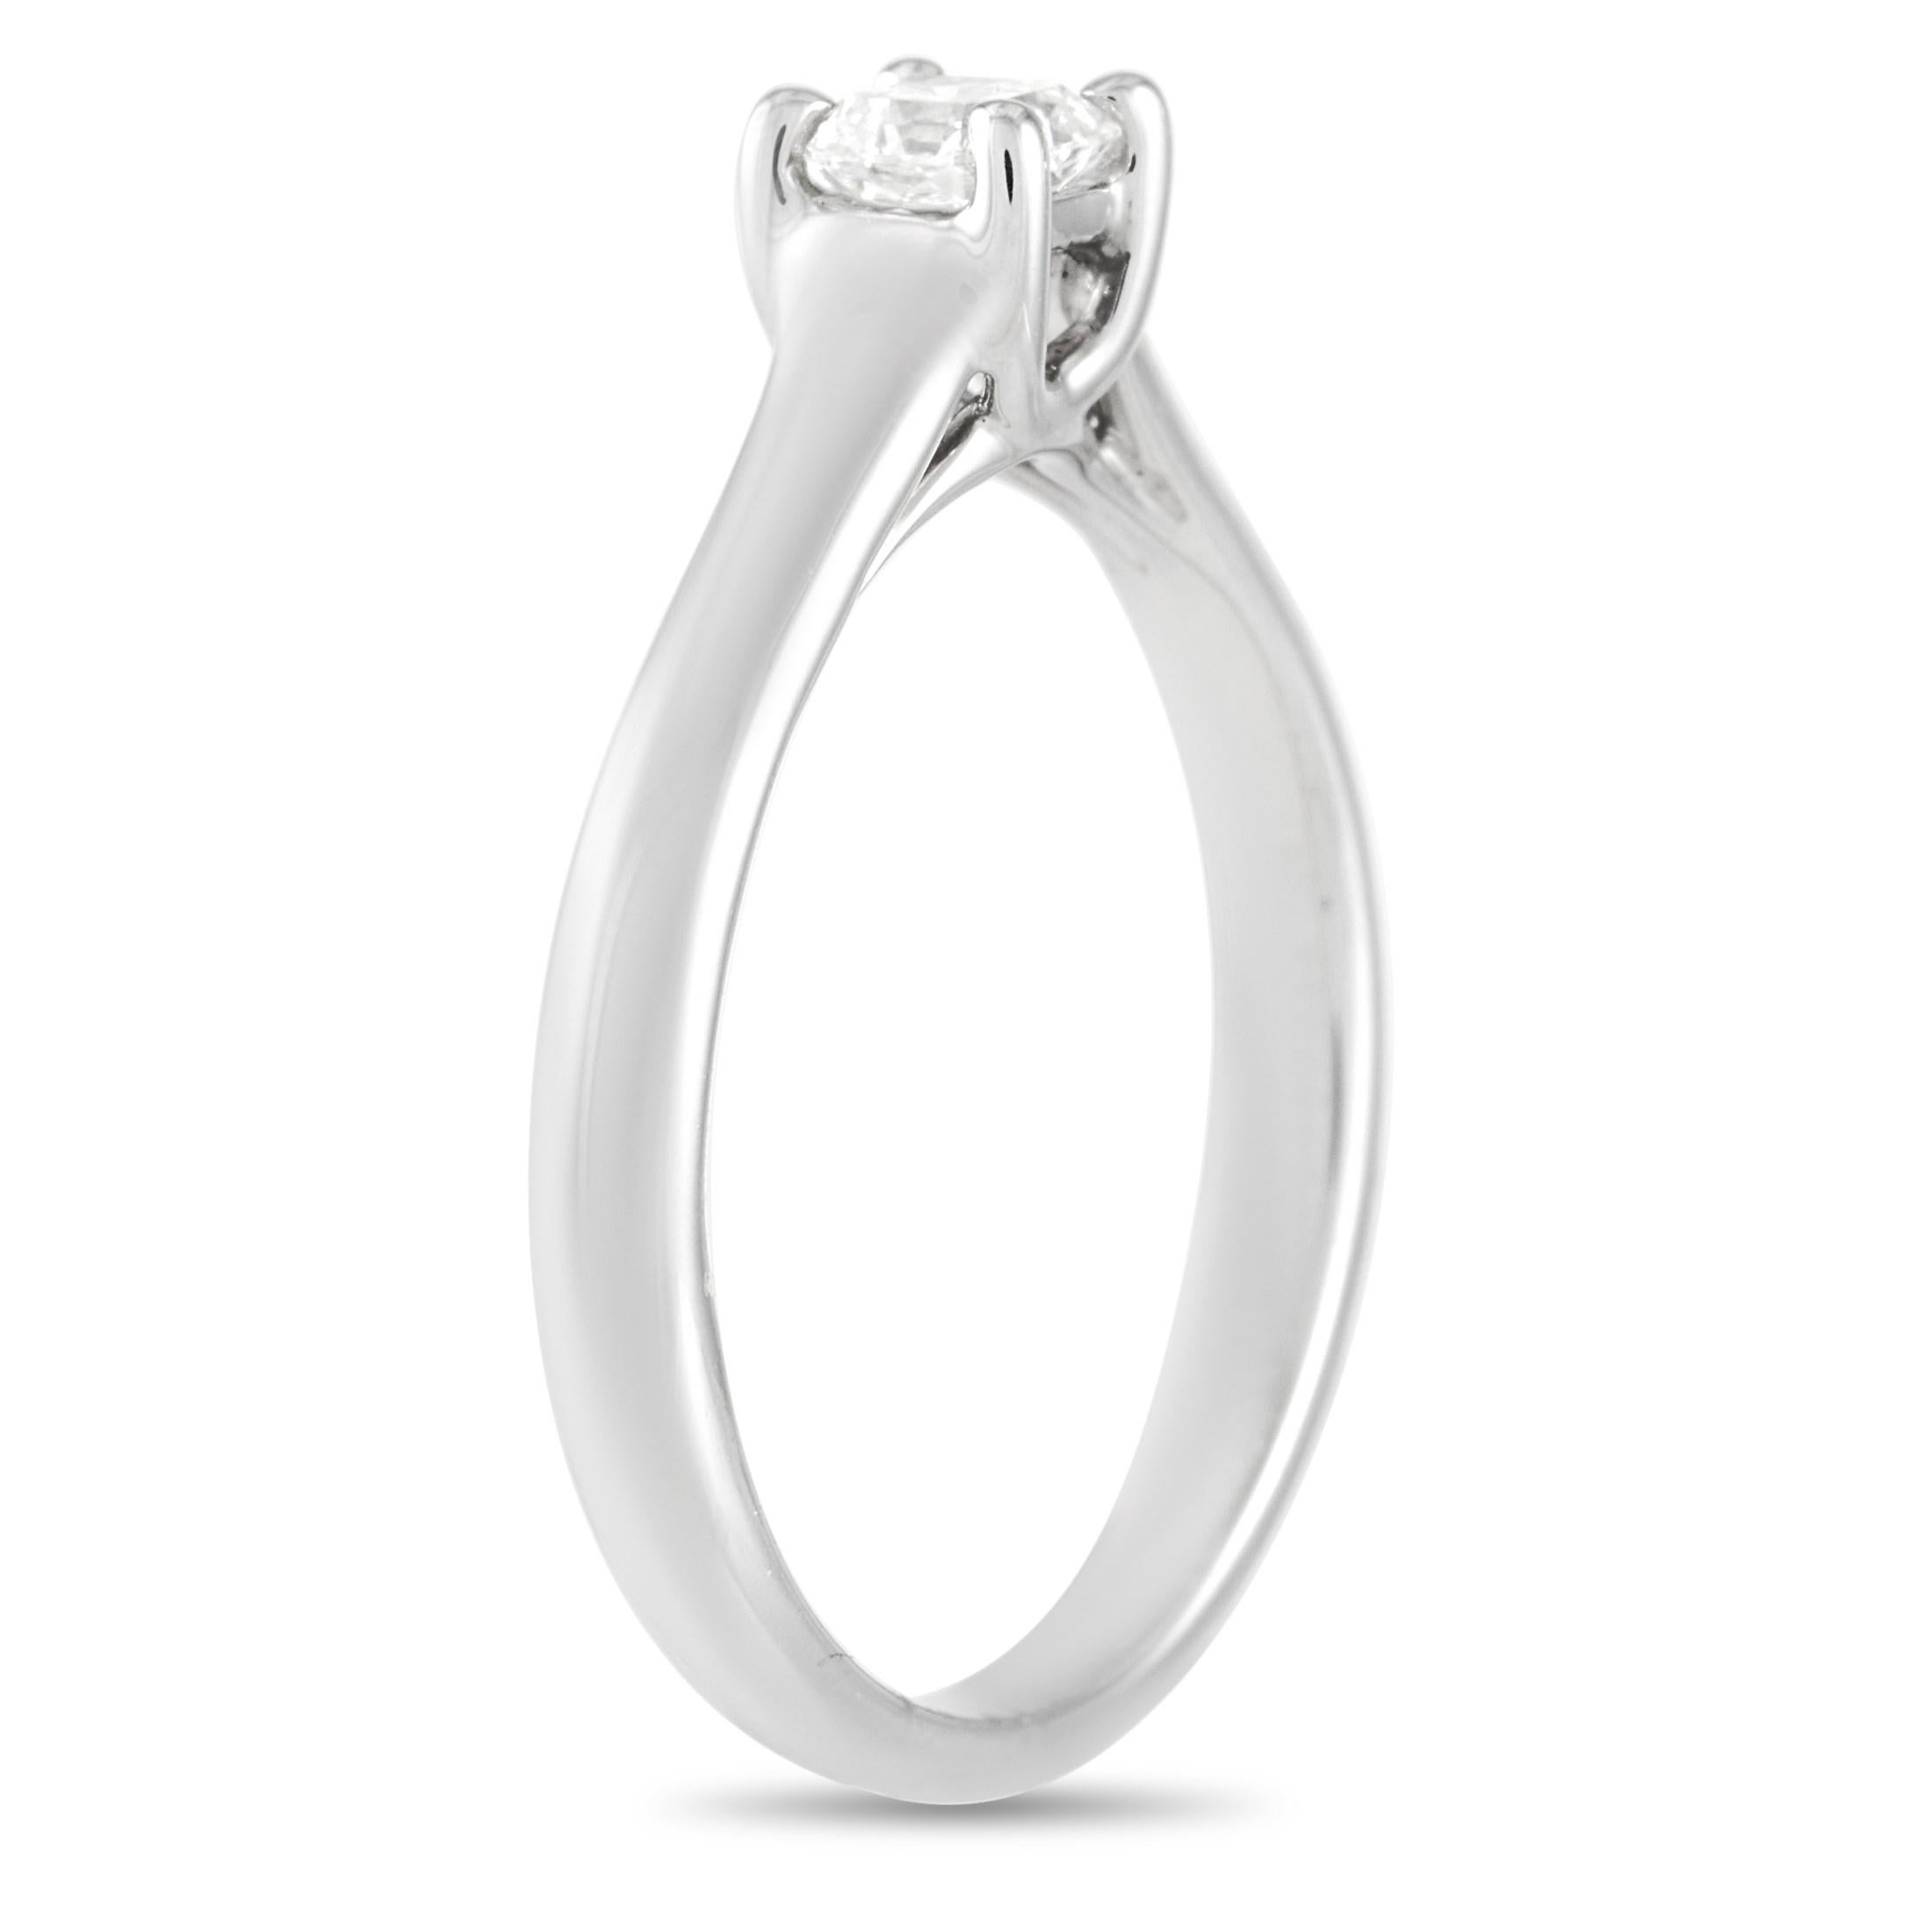 This classic Tiffany & Co. Platinum Solitaire Lucida Diamond Engagement Ring is a timeless piece. The simple band is made with platinum and highlights a solitary Lucida diamond of H color and VVS2 clarity. The ring weighs a total of 3.6 grams and